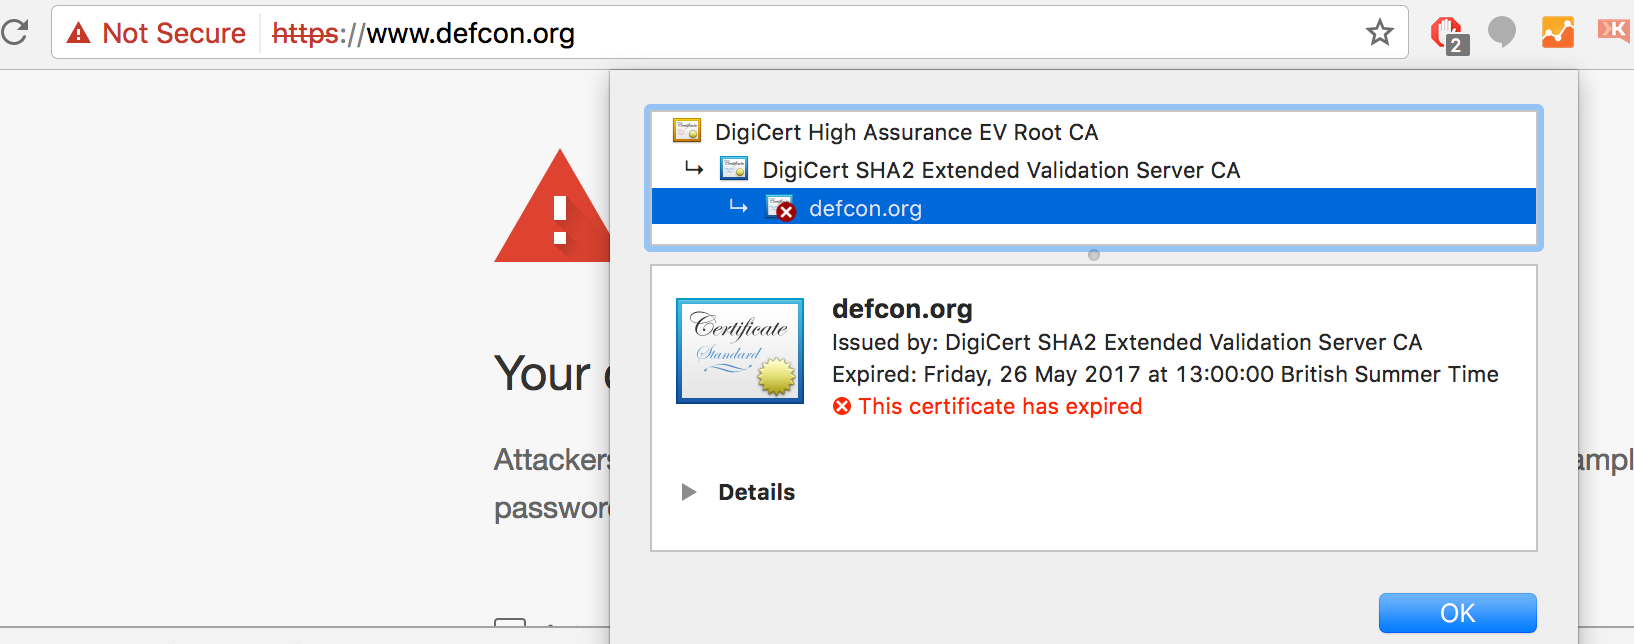 DefCon website down due to expired certificate. 